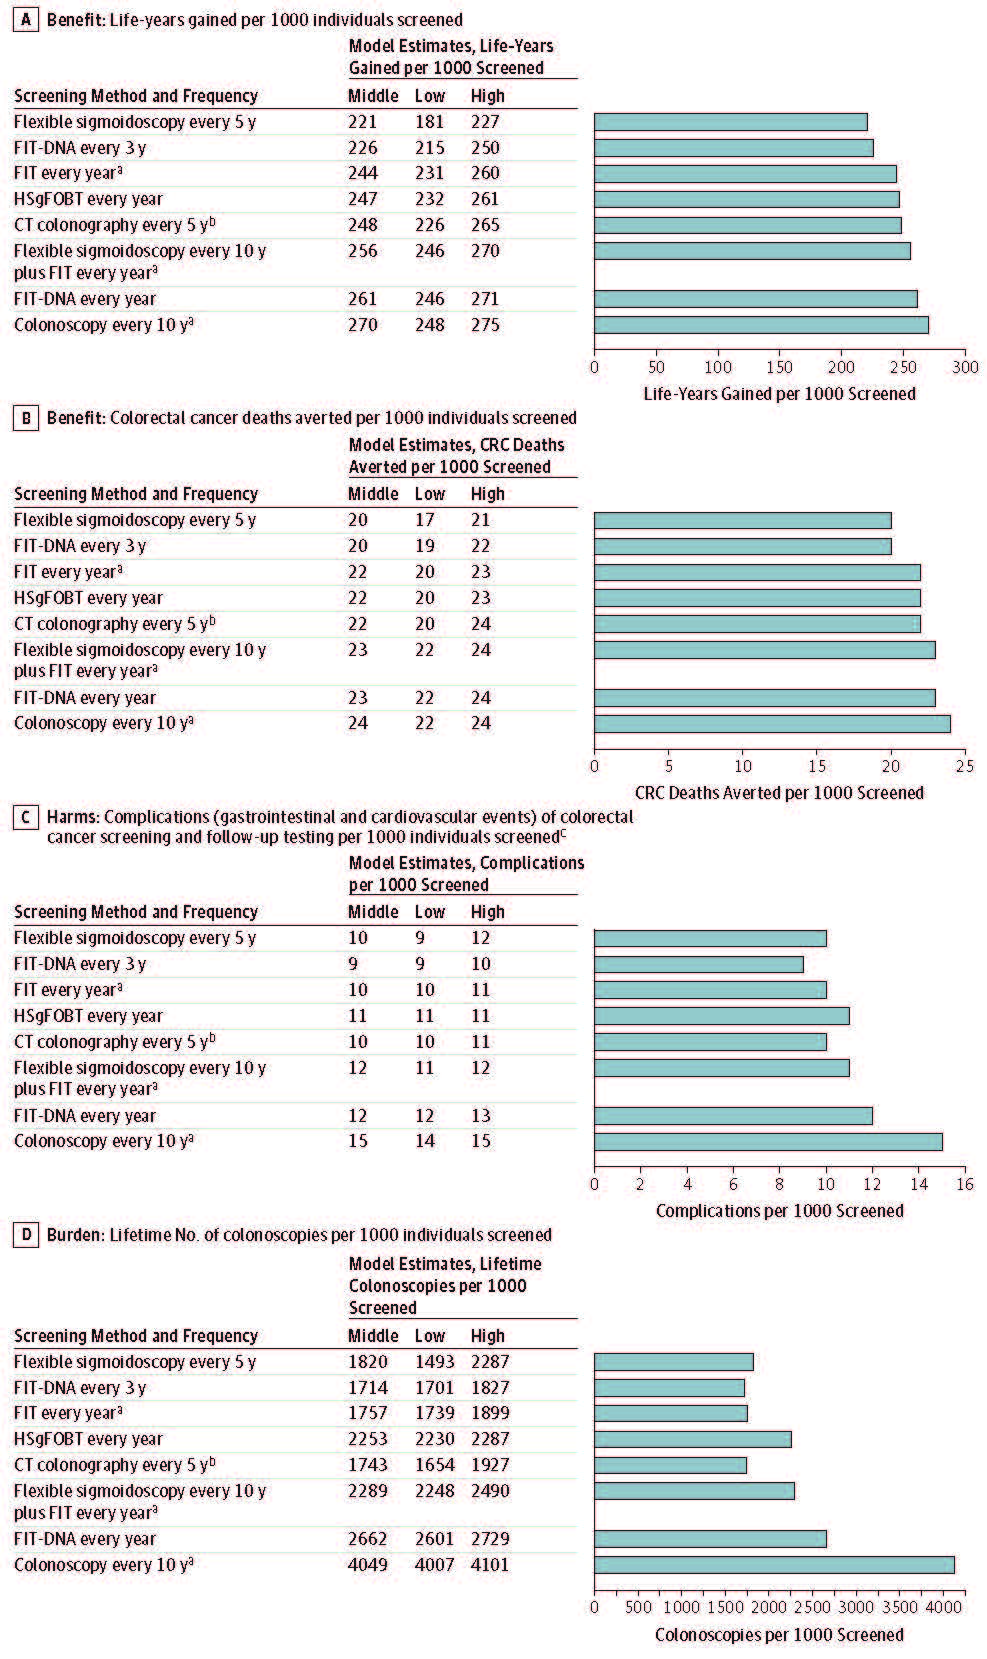 Figure 3. Benefits, Harms, and Burden of Colorectal Screening Strategies Over a Lifetime